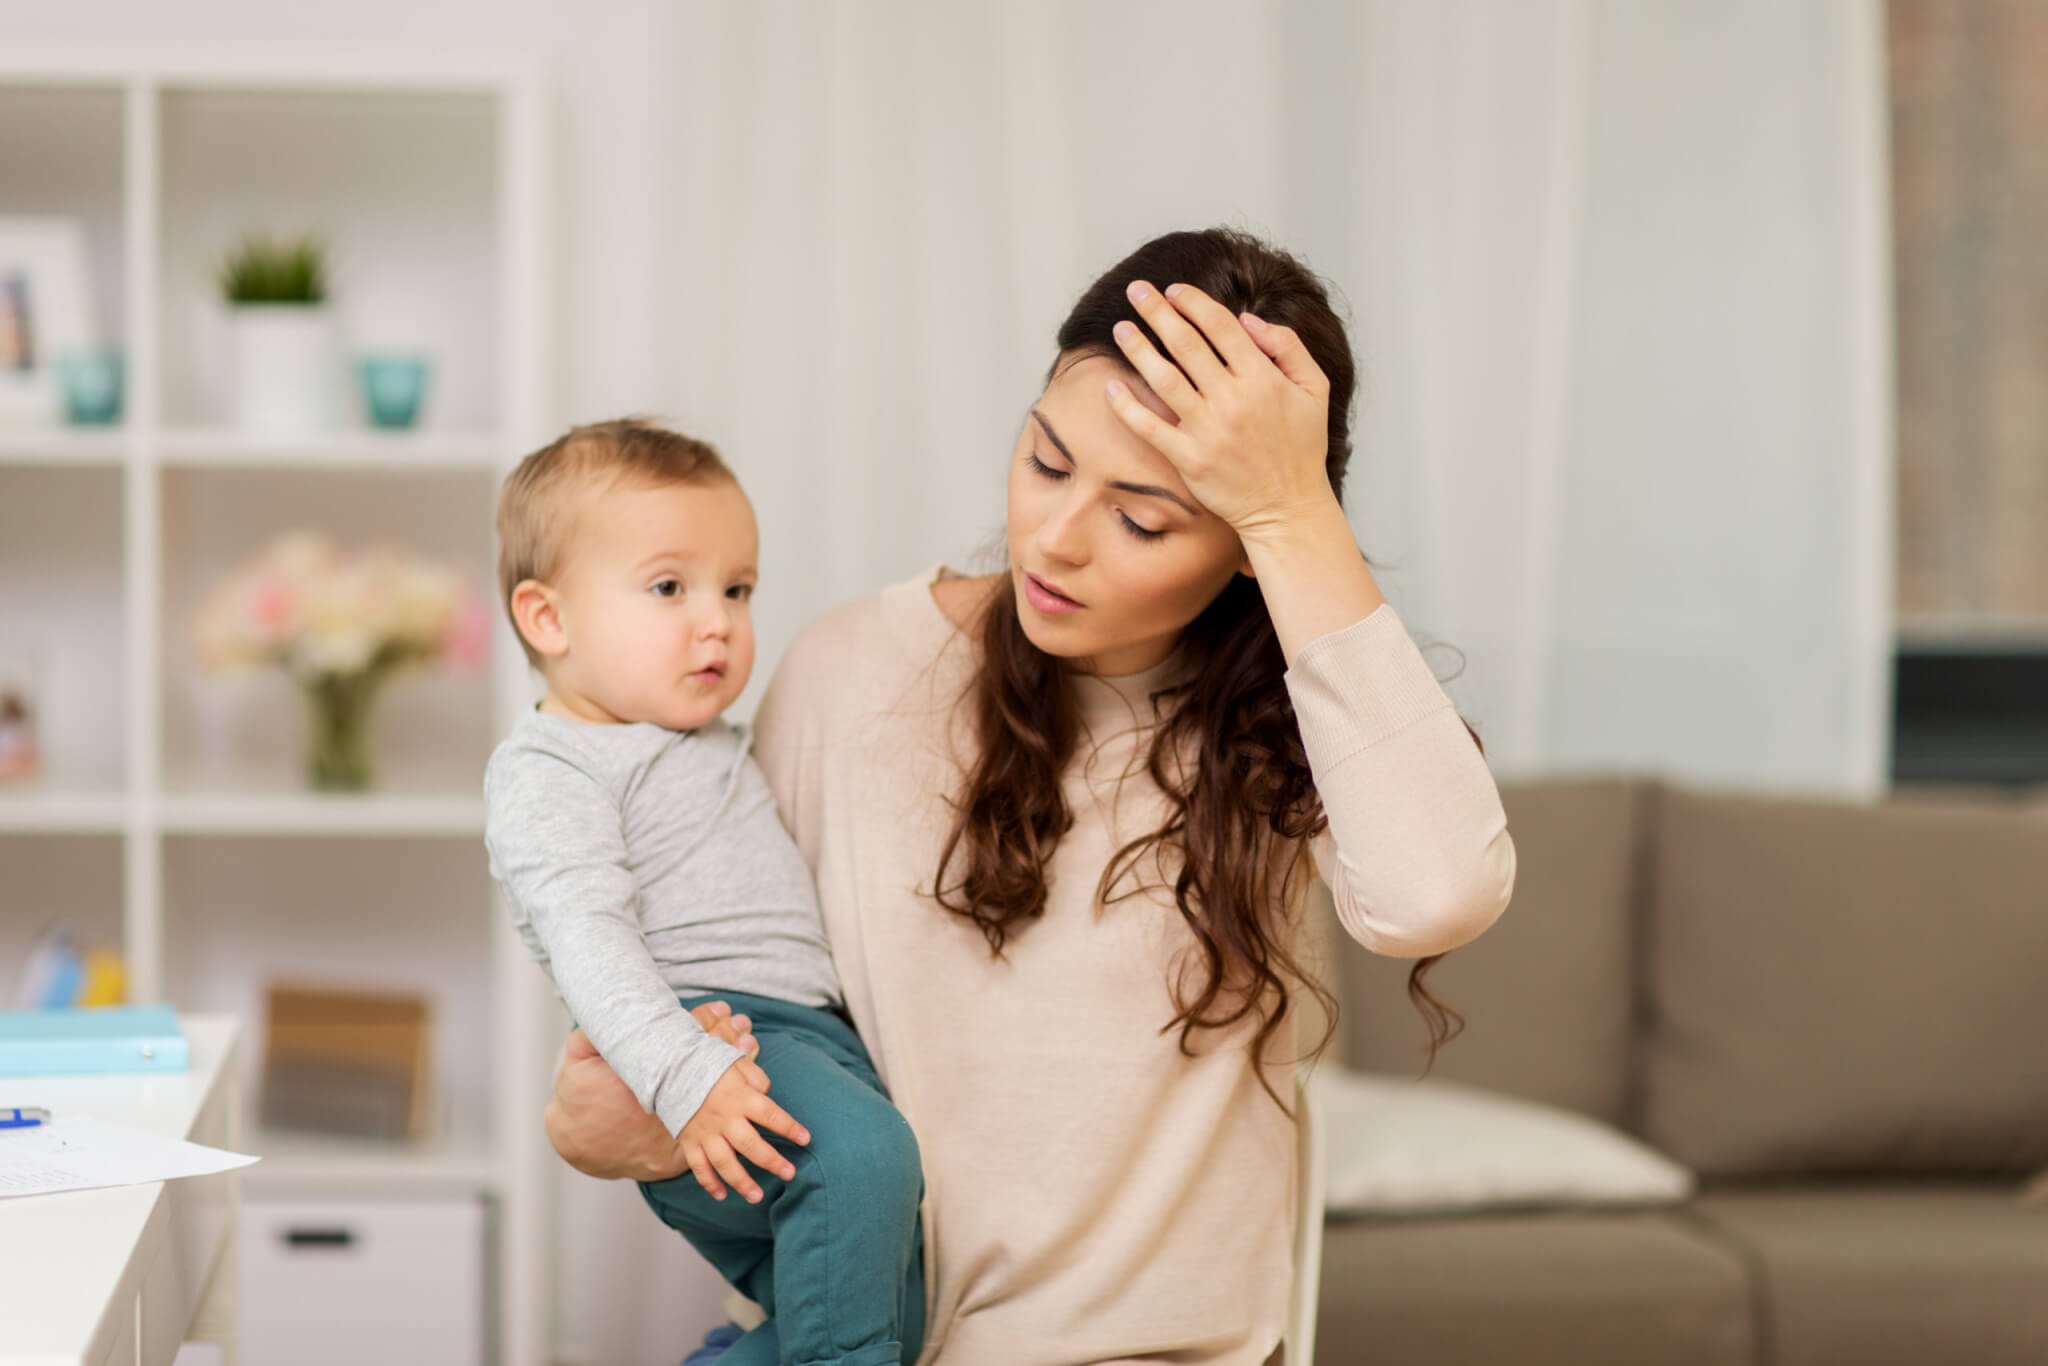 Exhausted, stressed mother with baby sighing